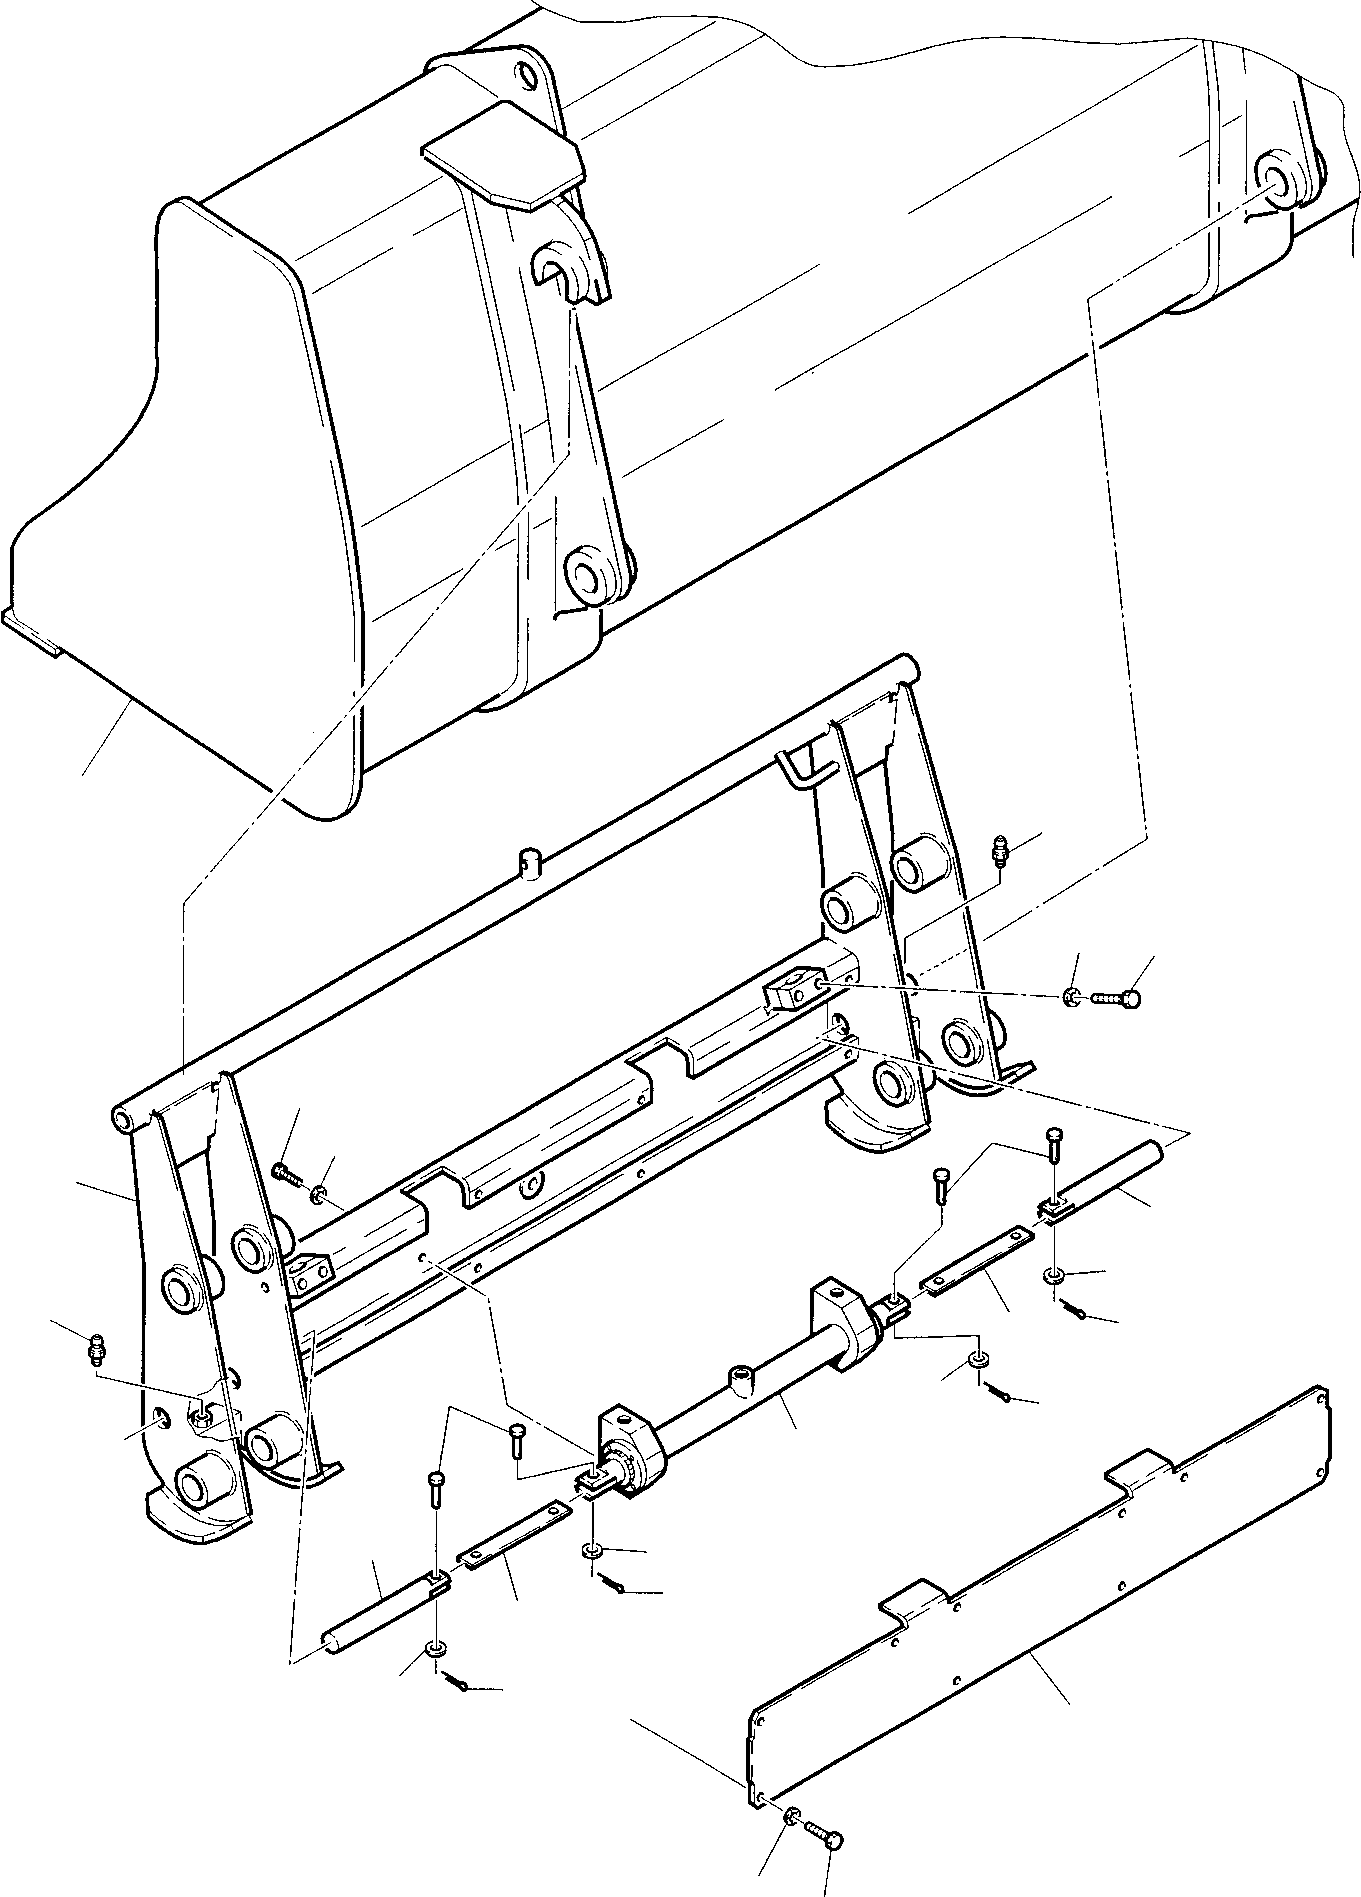 Part 9. QUICK HYDRAULIC COUPLING FOR BUCKET (OPTIONAL) [7060]